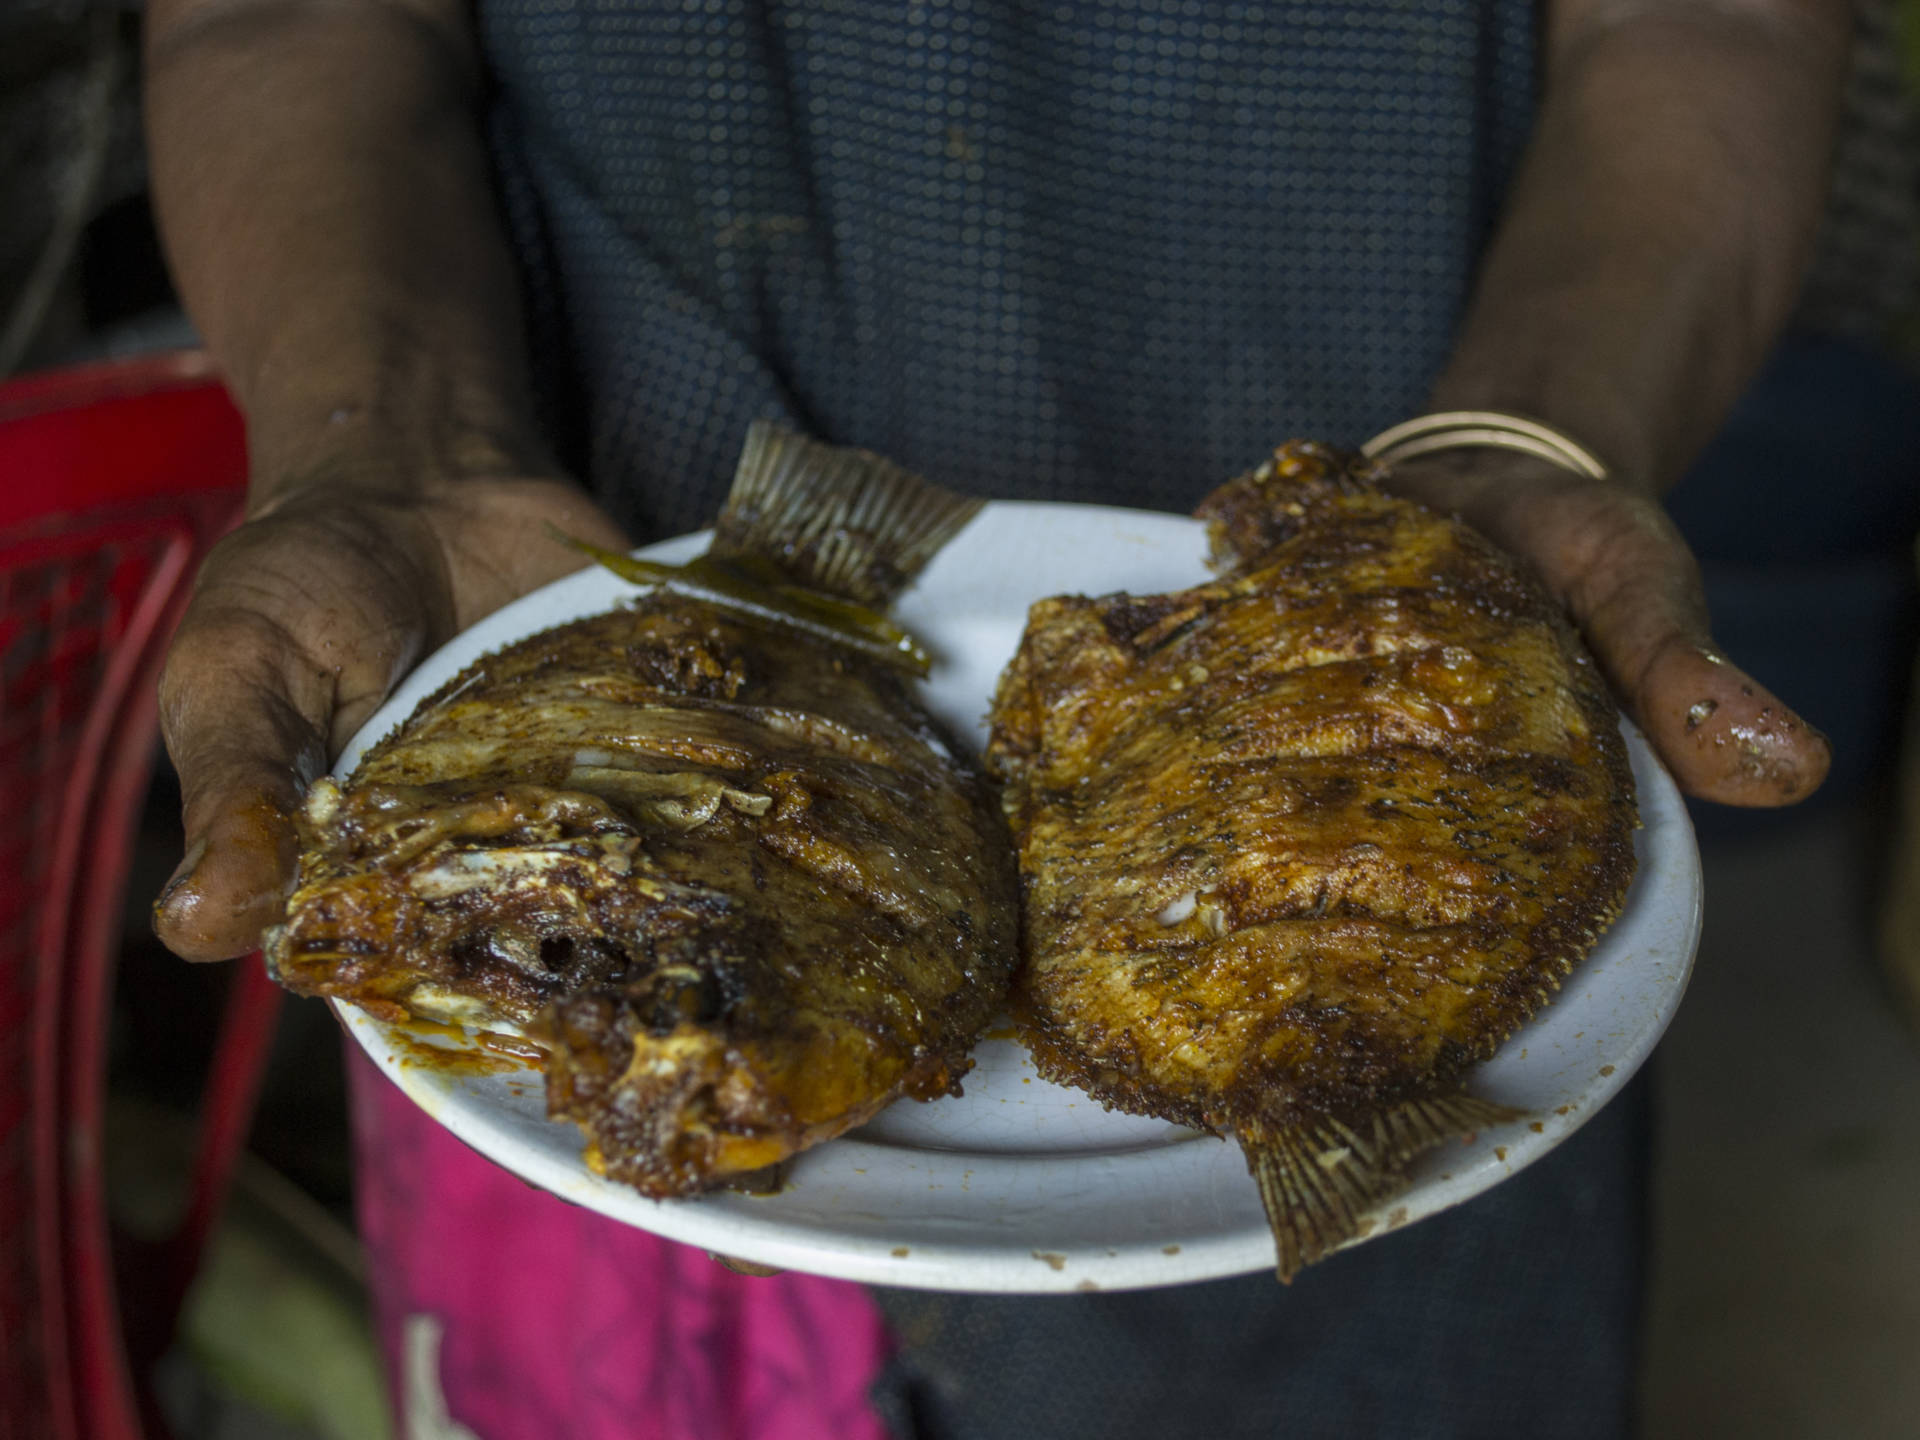 At Mullapanthal, fresh karimeen from the backwaters is marinated and fried to order.